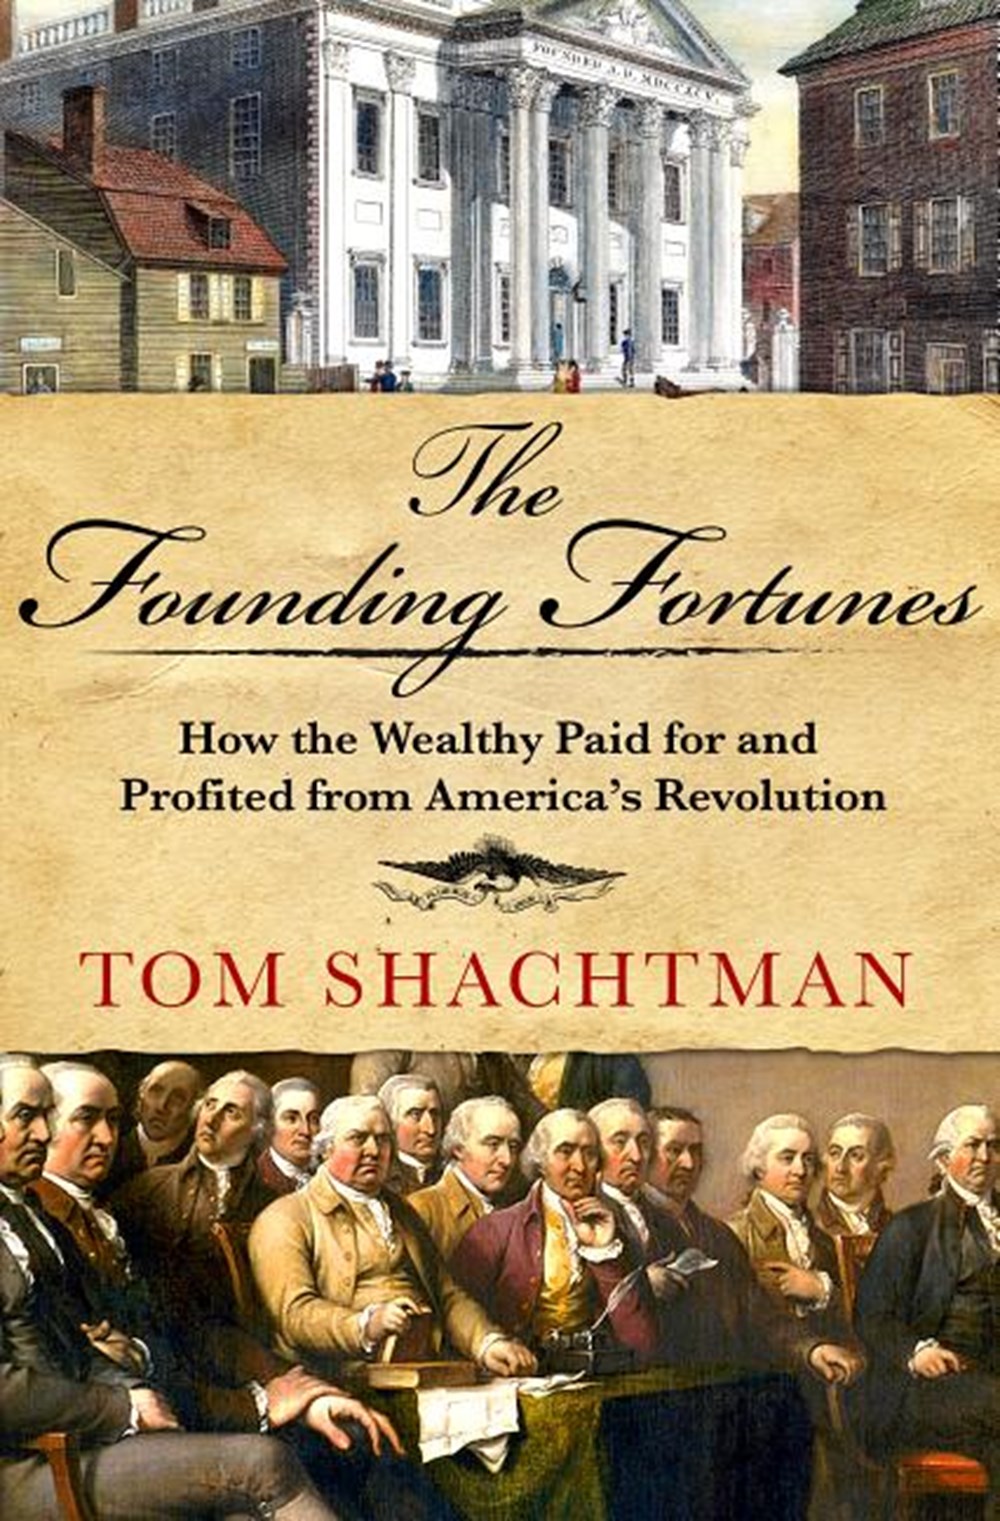 Founding Fortunes: How the Wealthy Paid for and Profited from America's Revolution